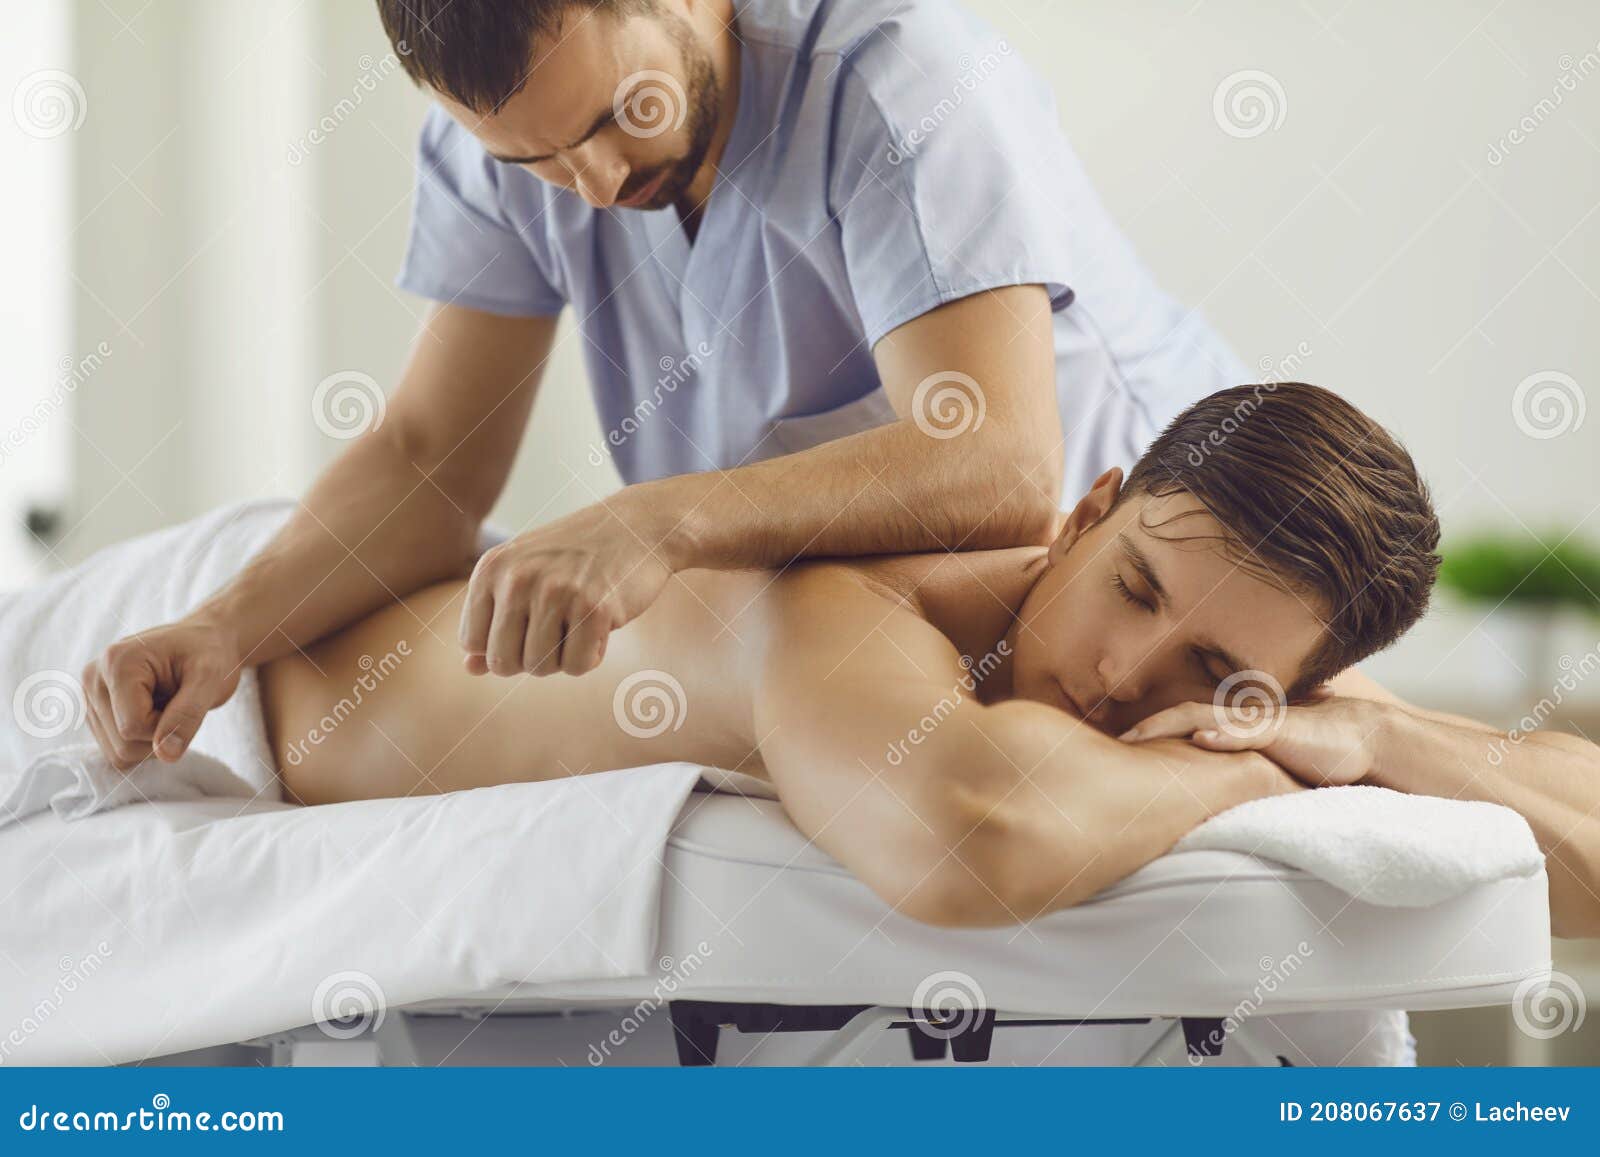 relaxed young man enjoying remedial body massage in spa salon or wellness center